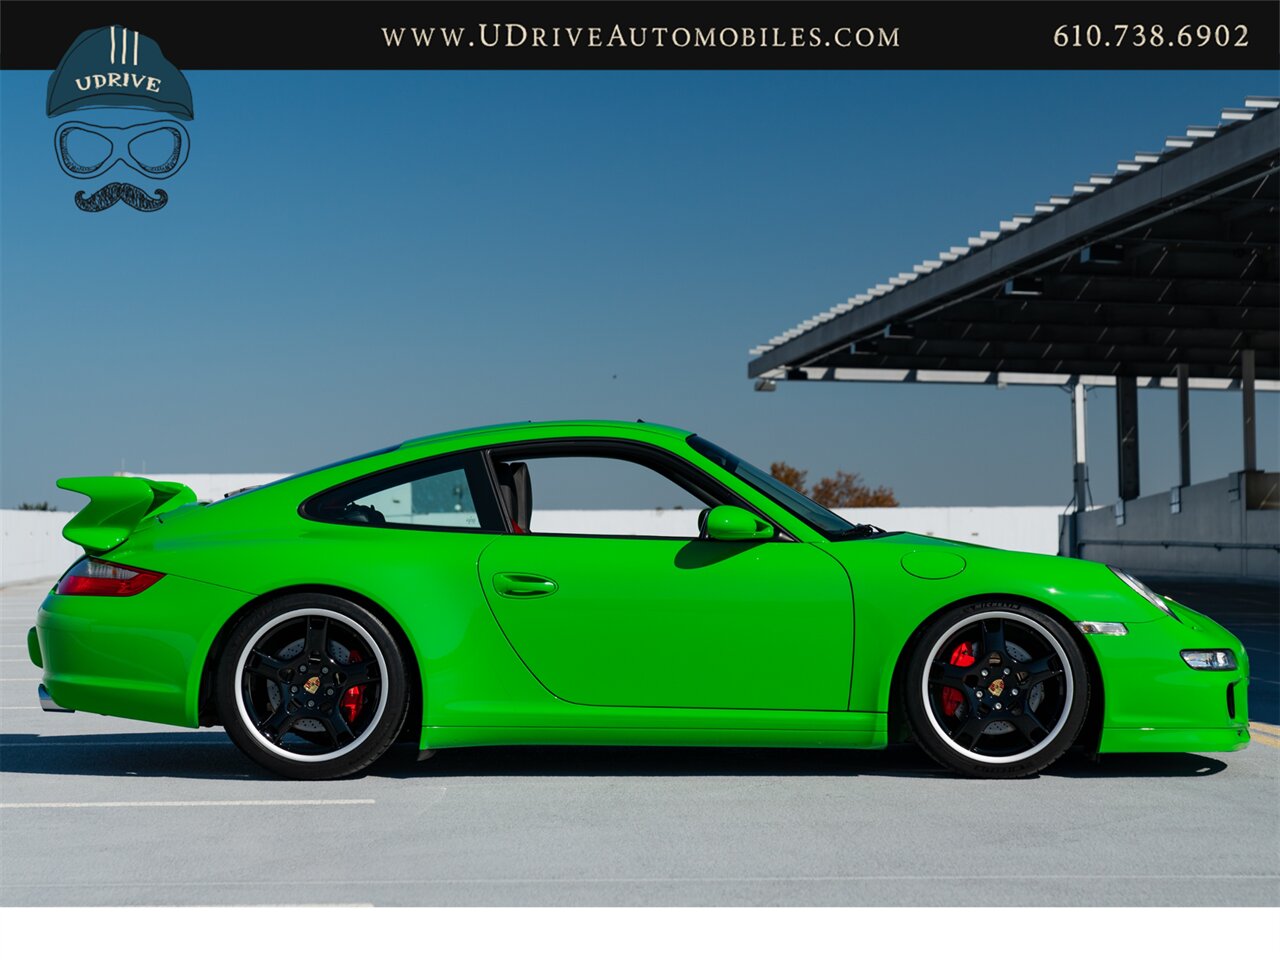 2006 Porsche 911 Carrera 4S  997 PTS Signal Green 6Sp Sport Sts Spt Chrono Spt Exhst - Photo 18 - West Chester, PA 19382